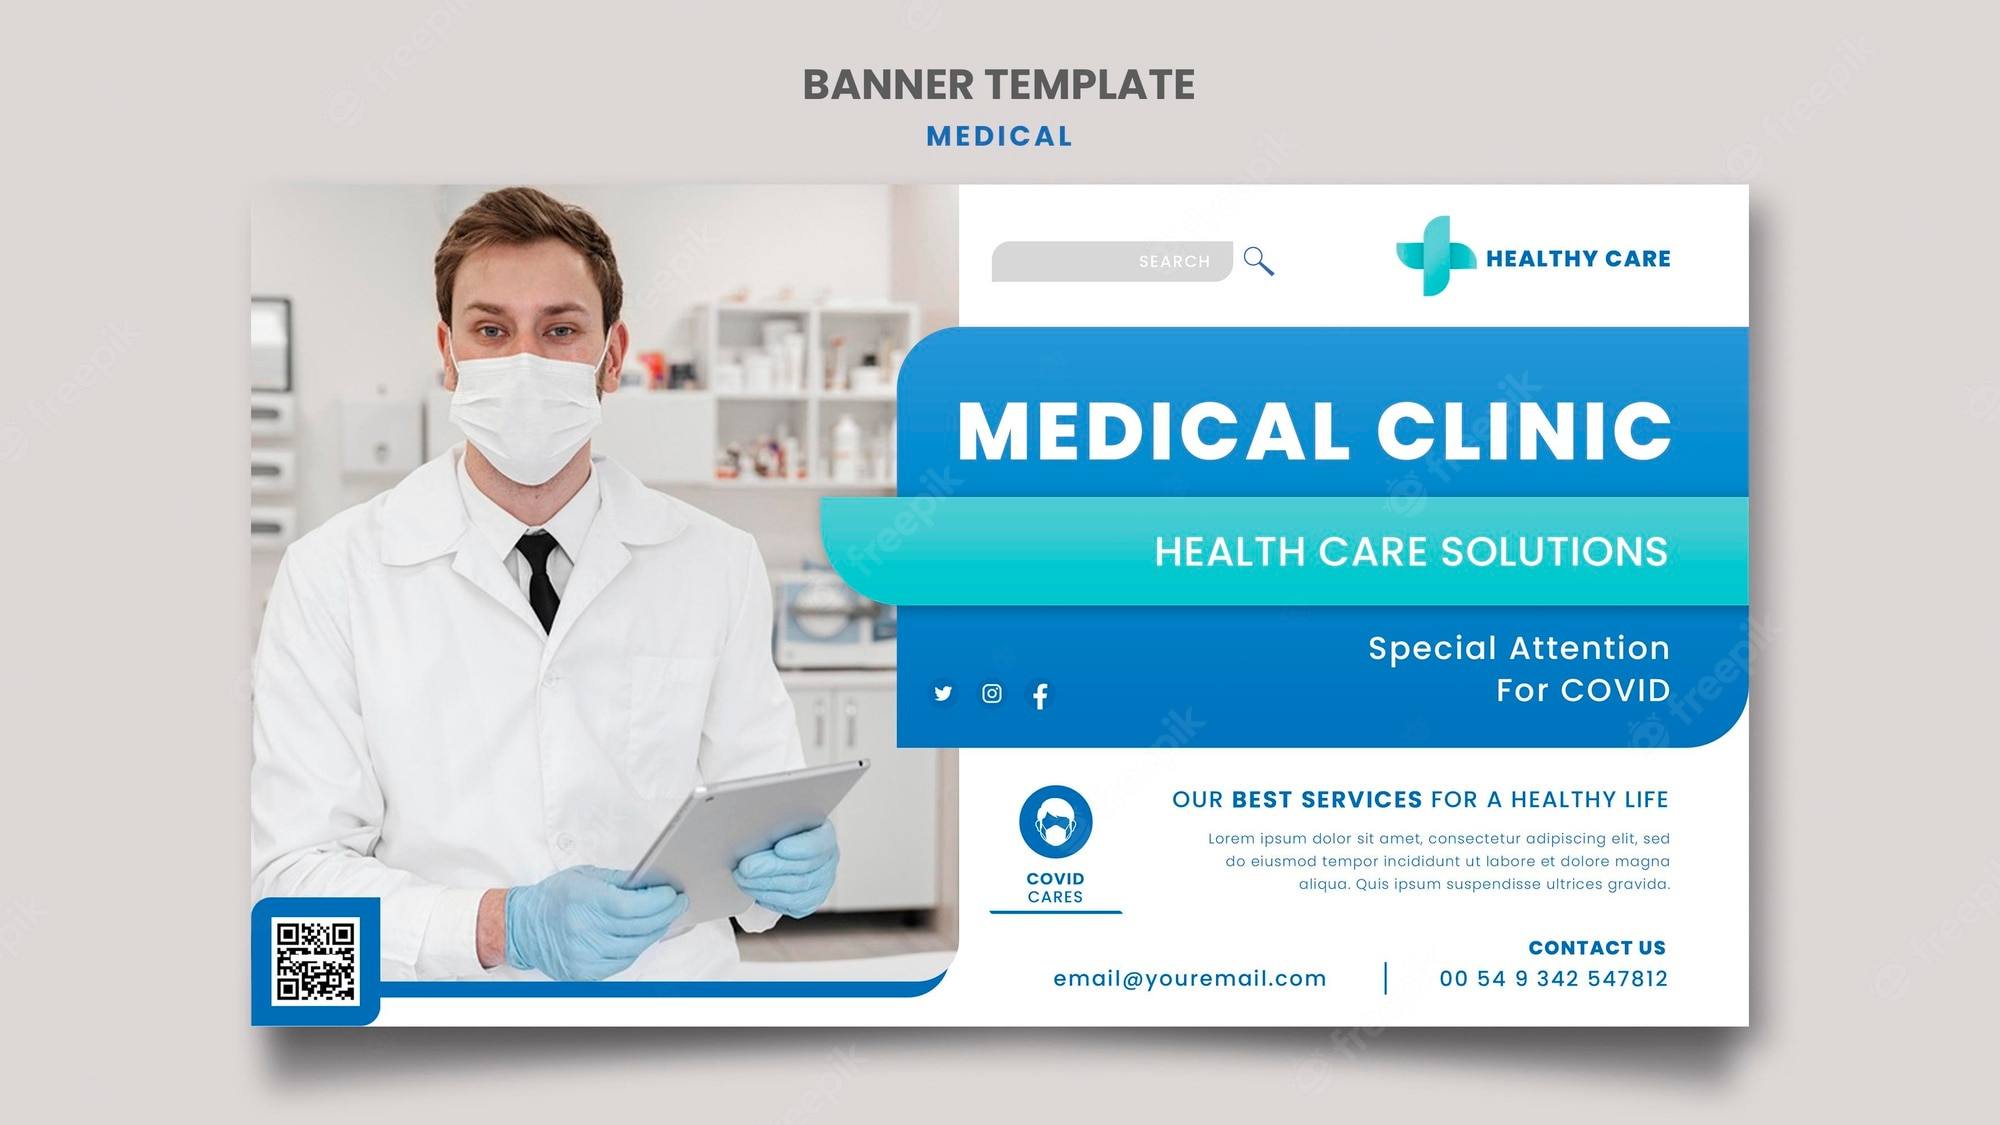 Medical Banner PSD, 10,10+ High Quality Free PSD Templates for